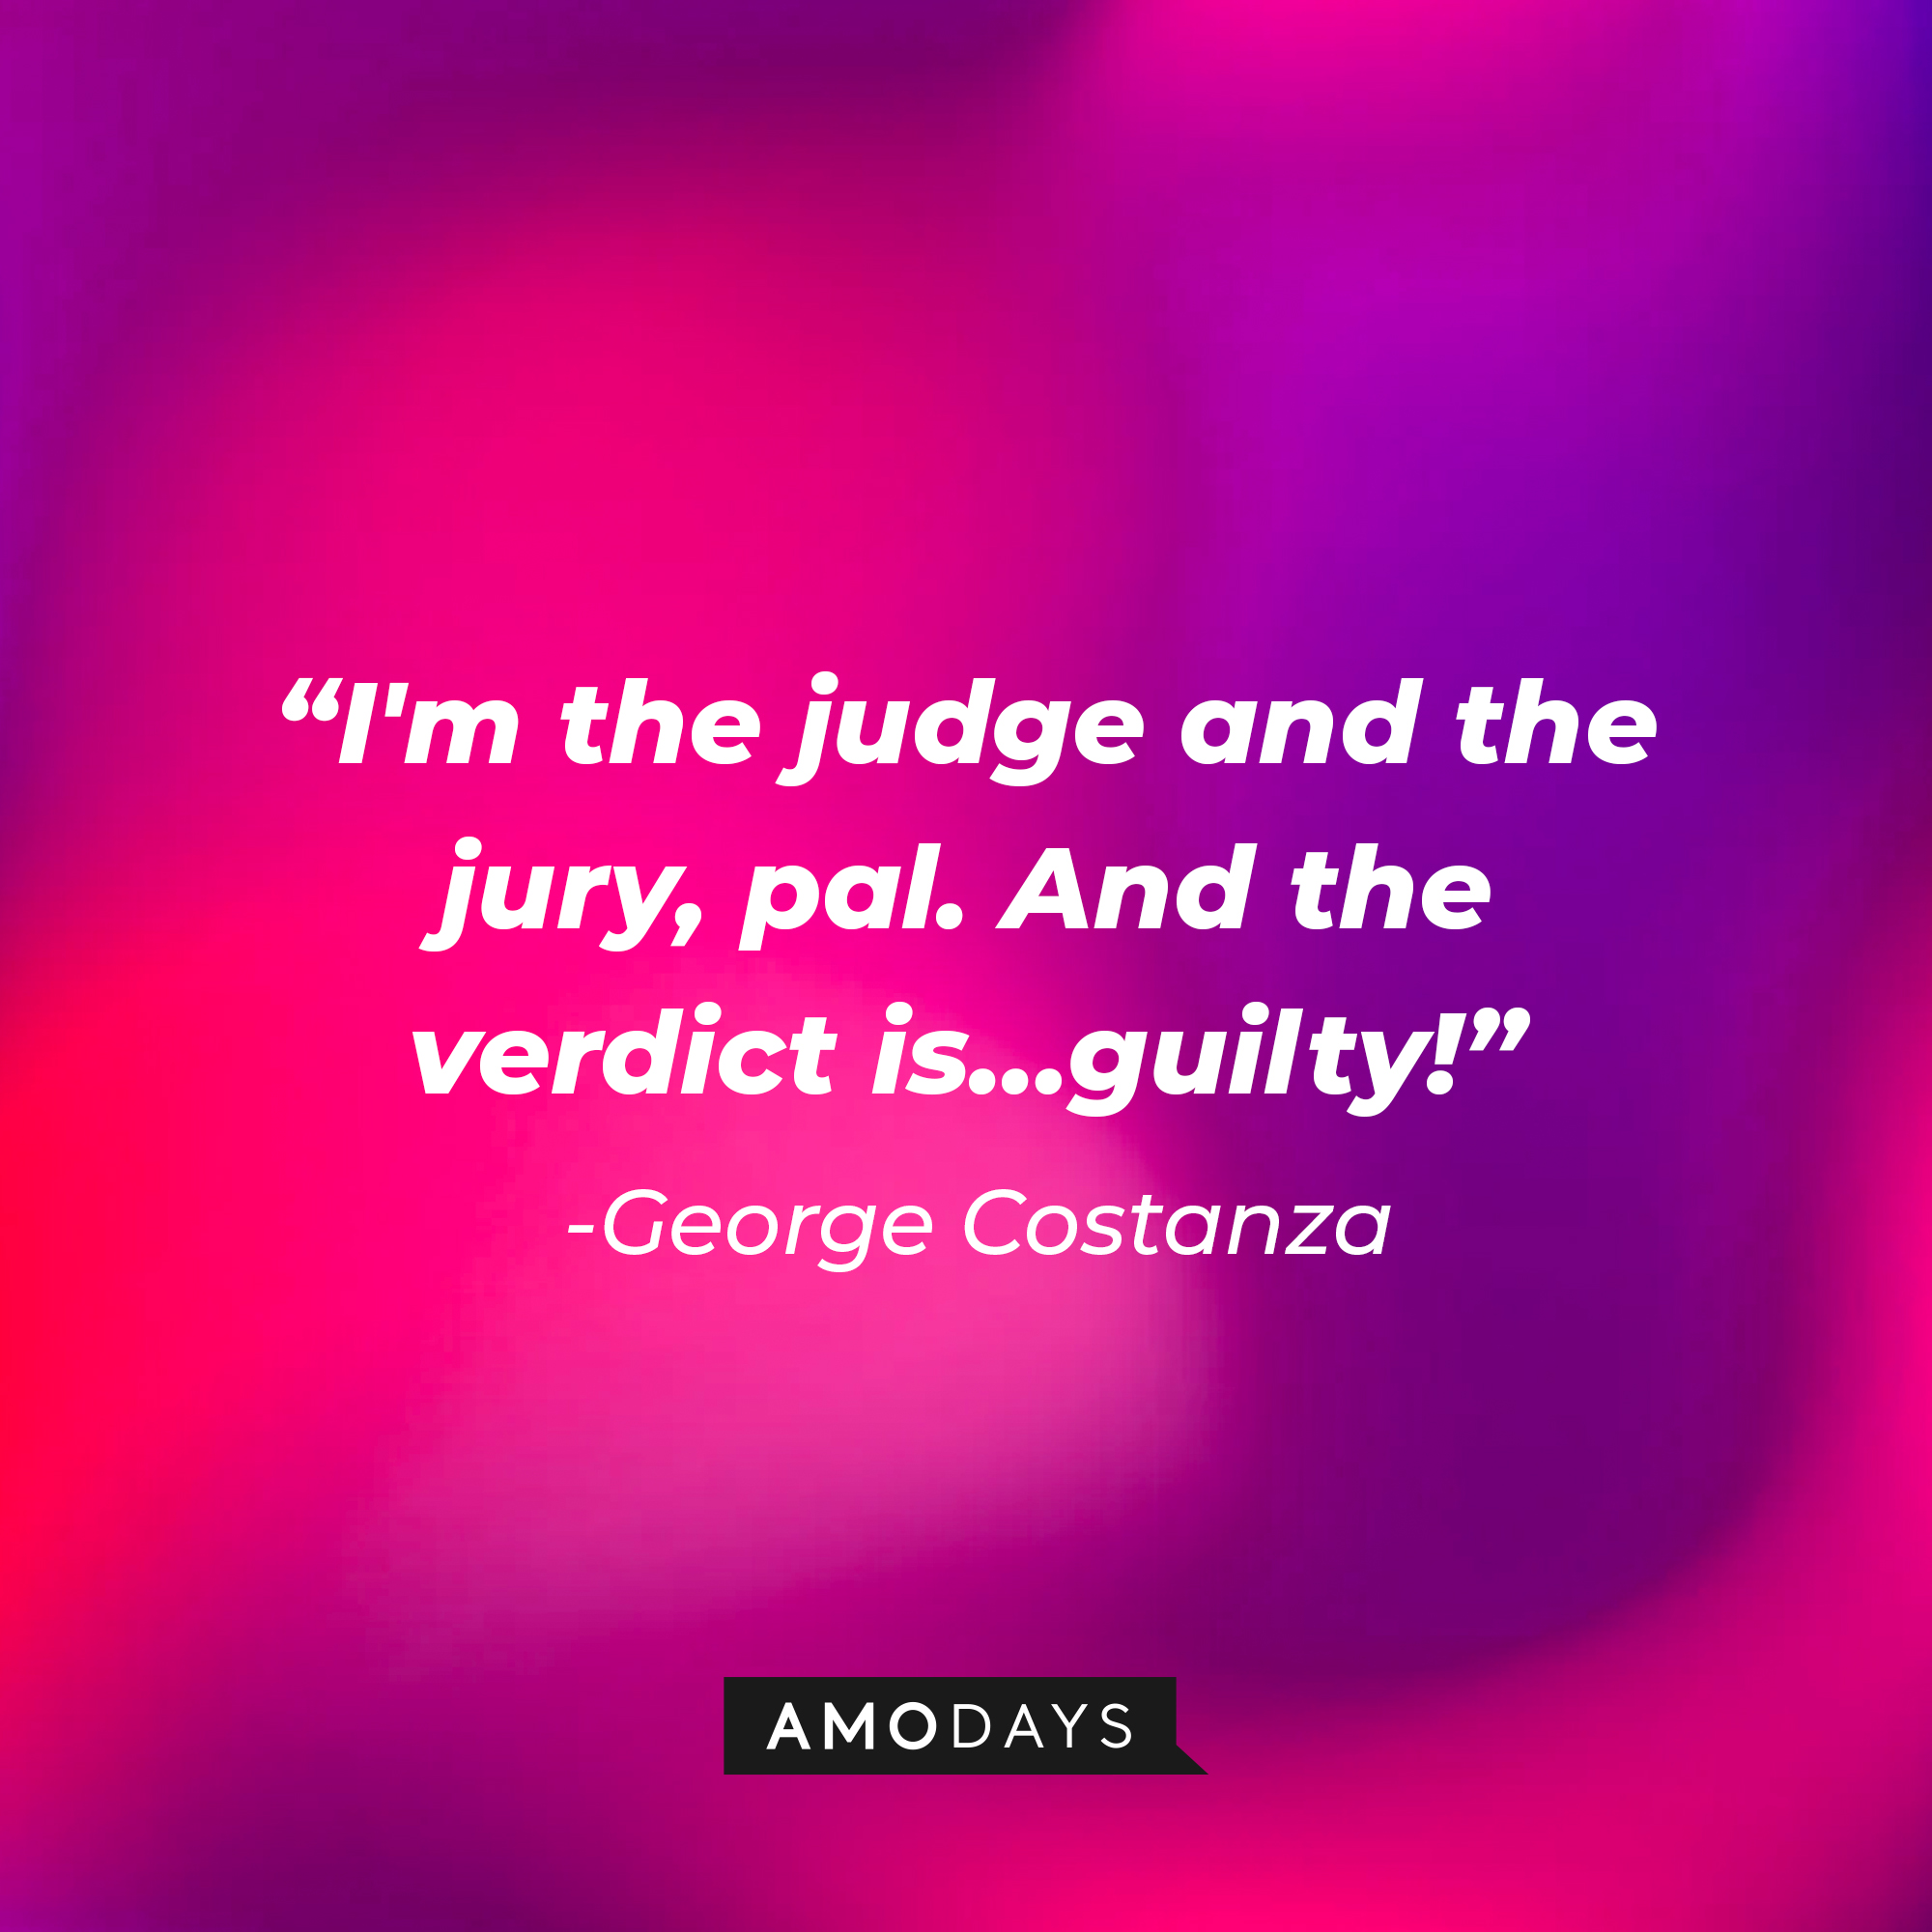 George Costanza's quote from "Suits" : "I'm the judge and the jury, pal. And the verdict is...guilty!" | Source: Amodays